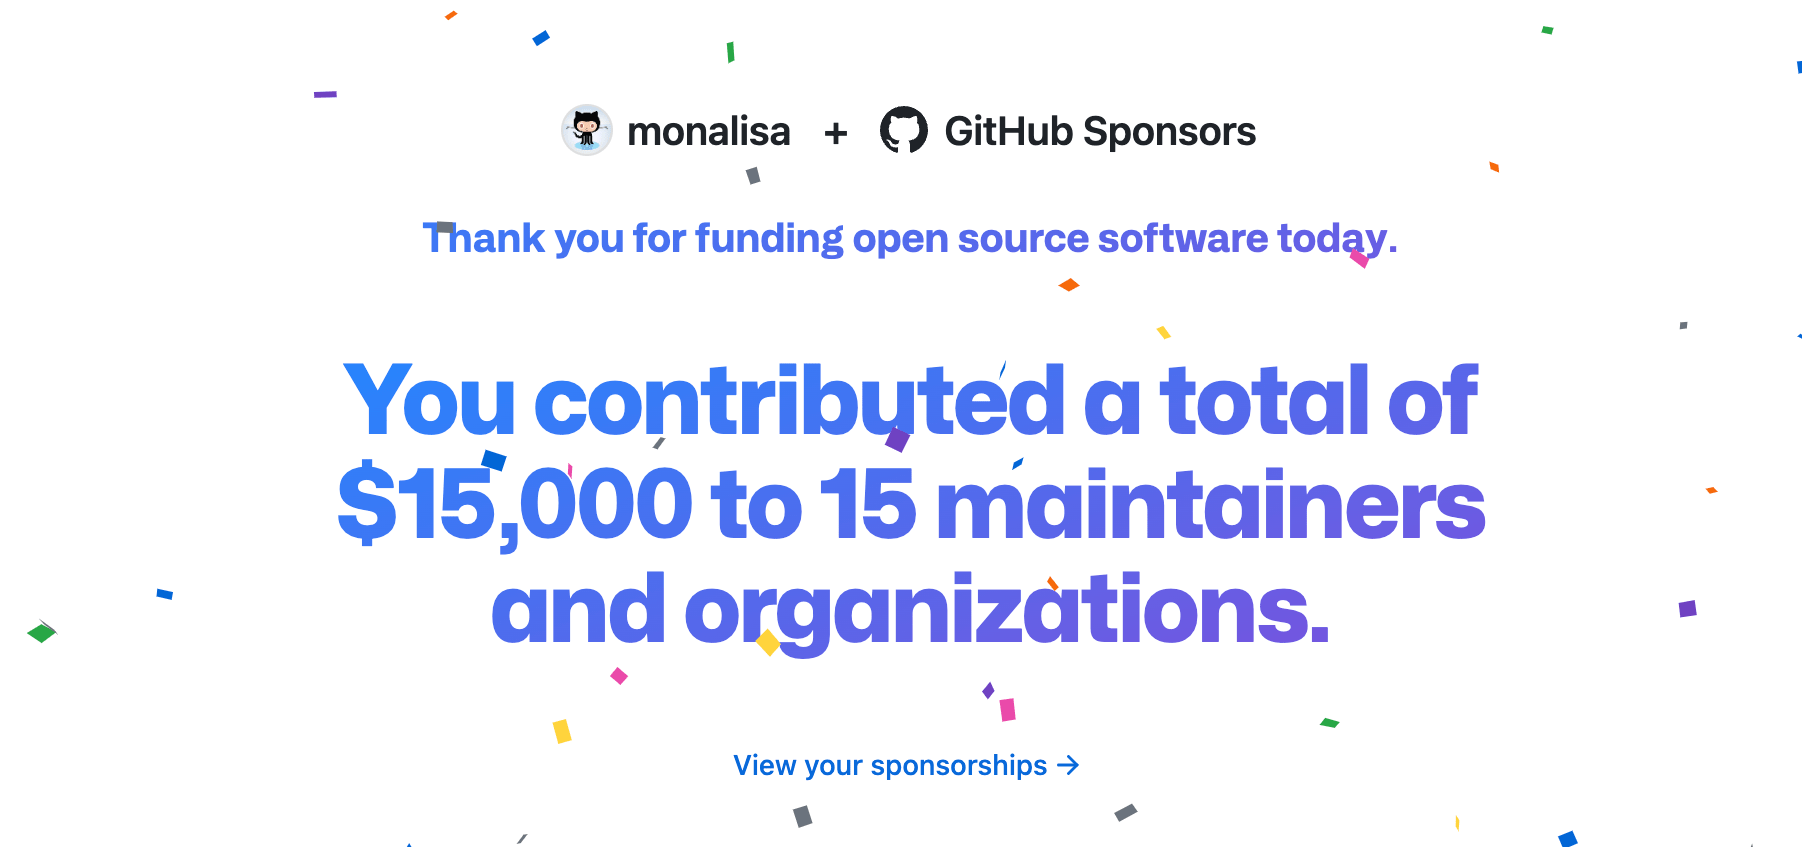 What’s new with GitHub Sponsors